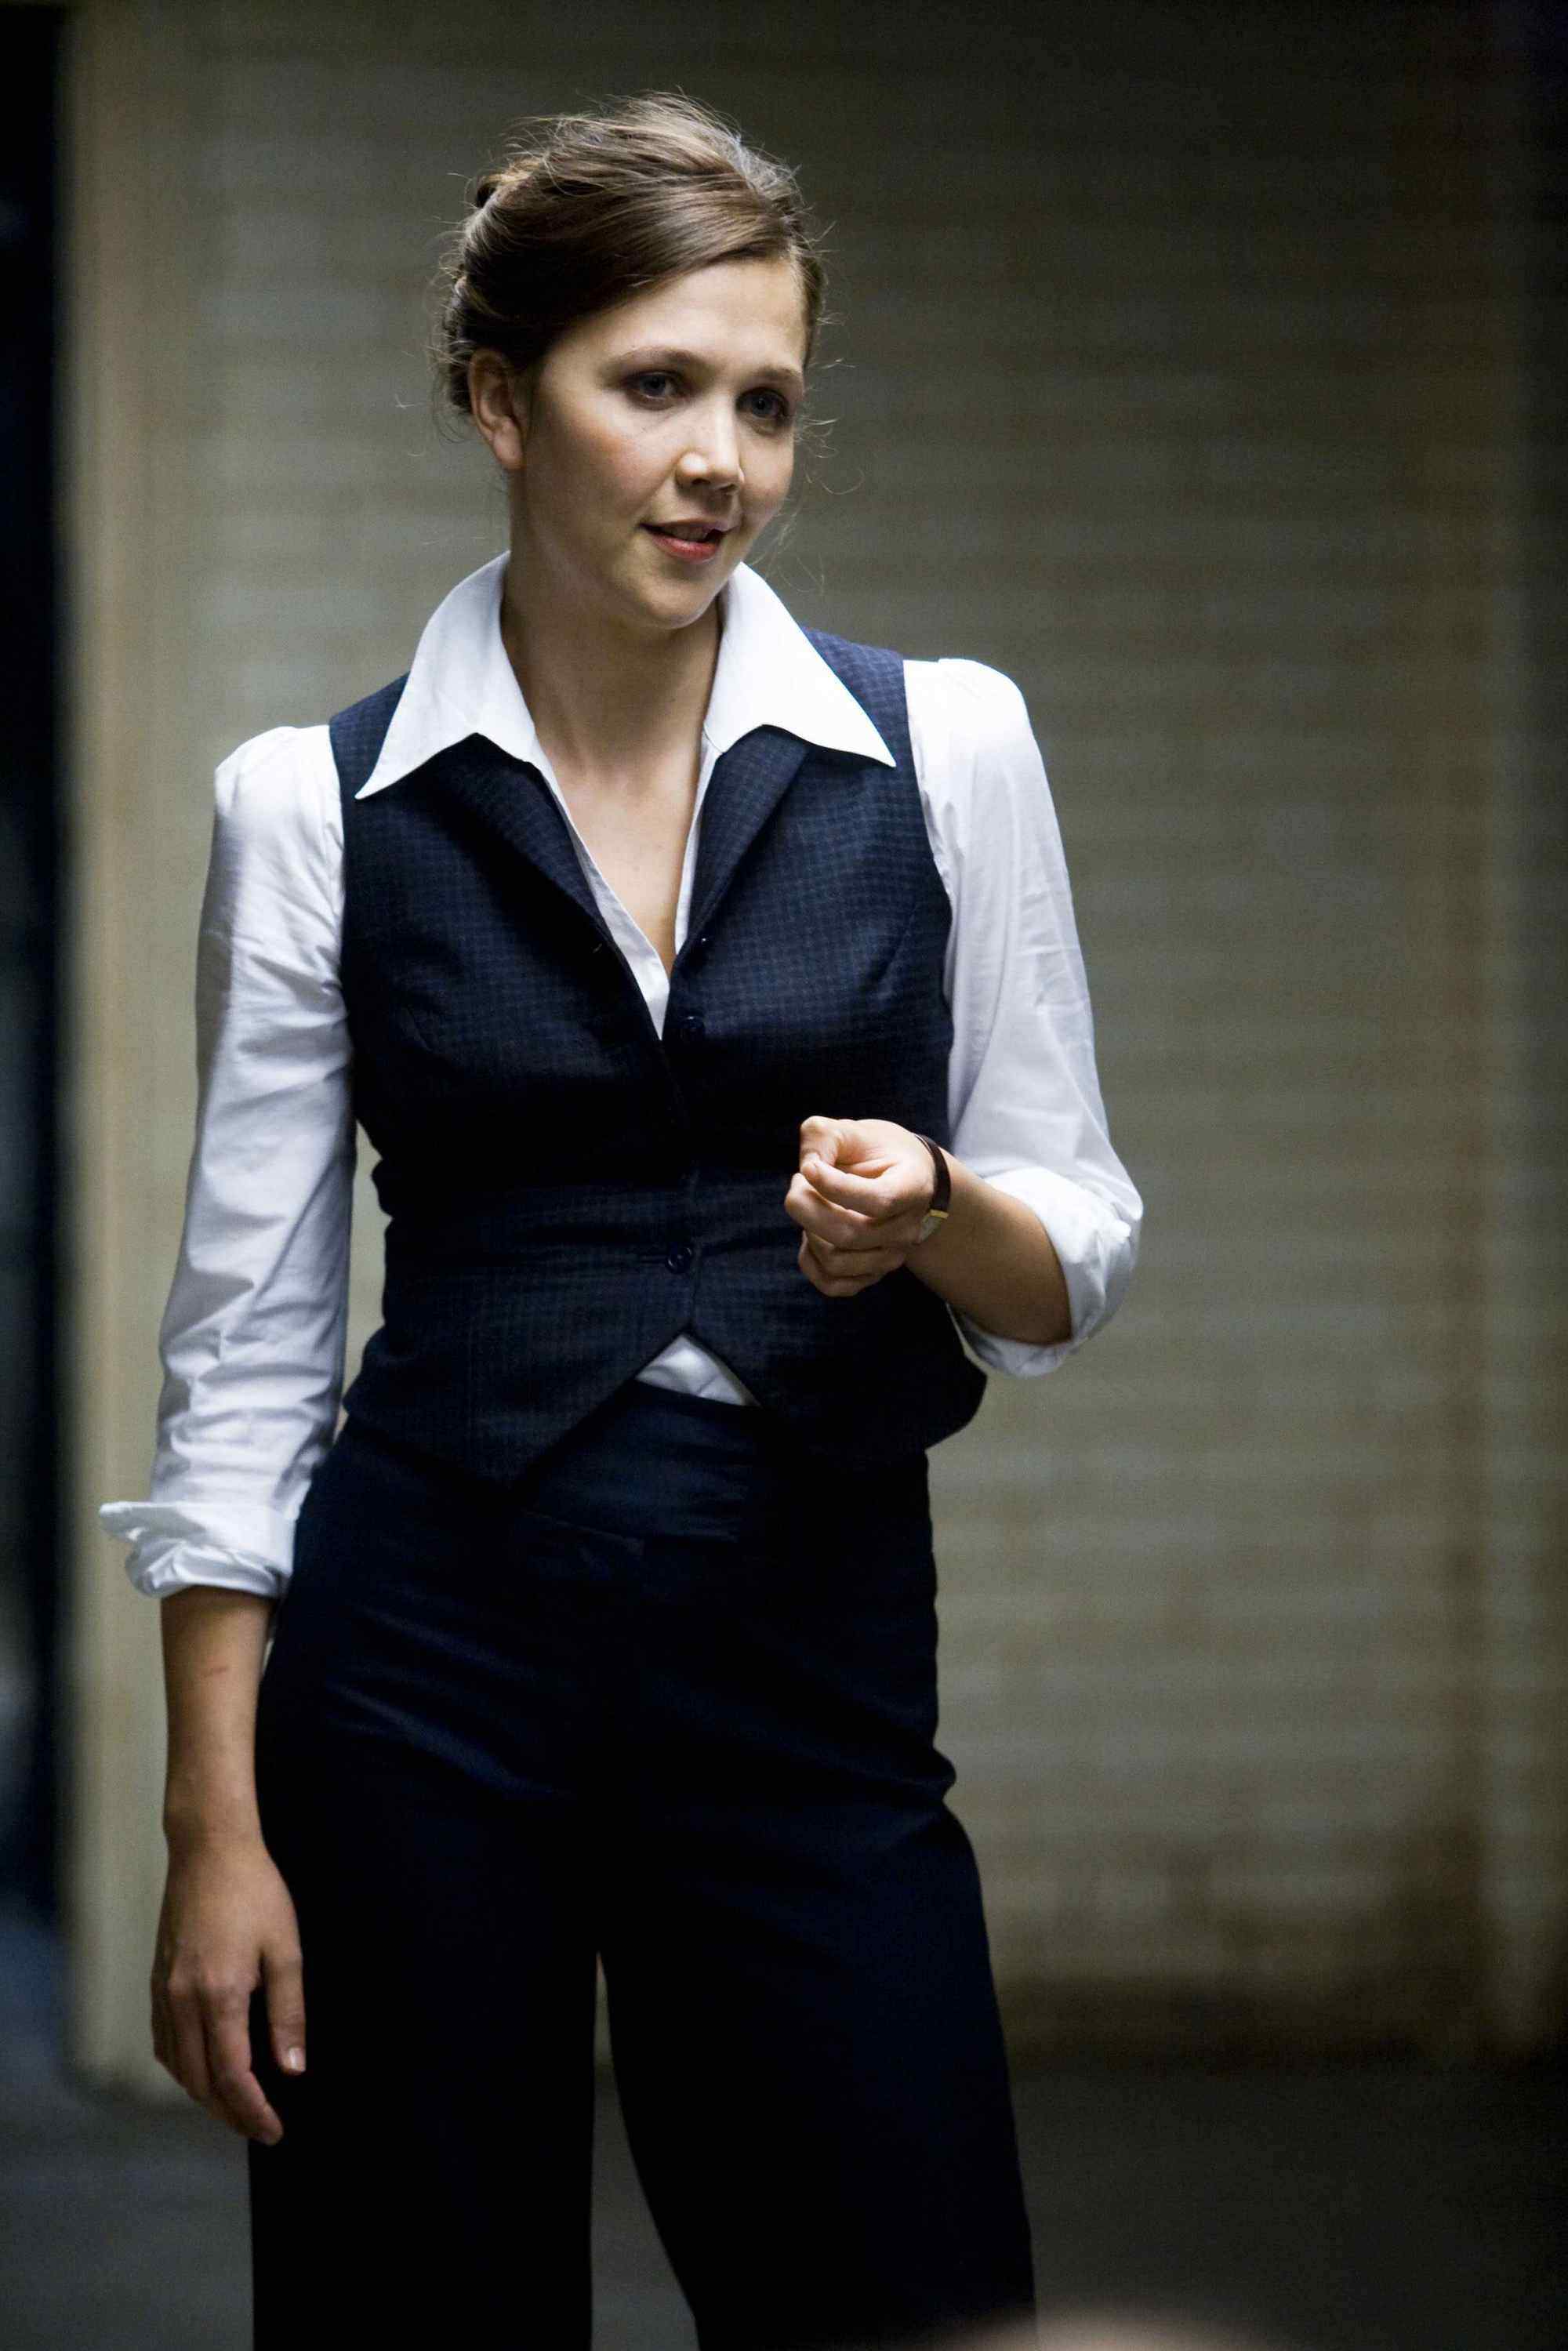 MAGGIE GYLLENHAAL stars as Rachel Dawes in Warner Bros. Pictures' and Legendary Pictures' action drama 